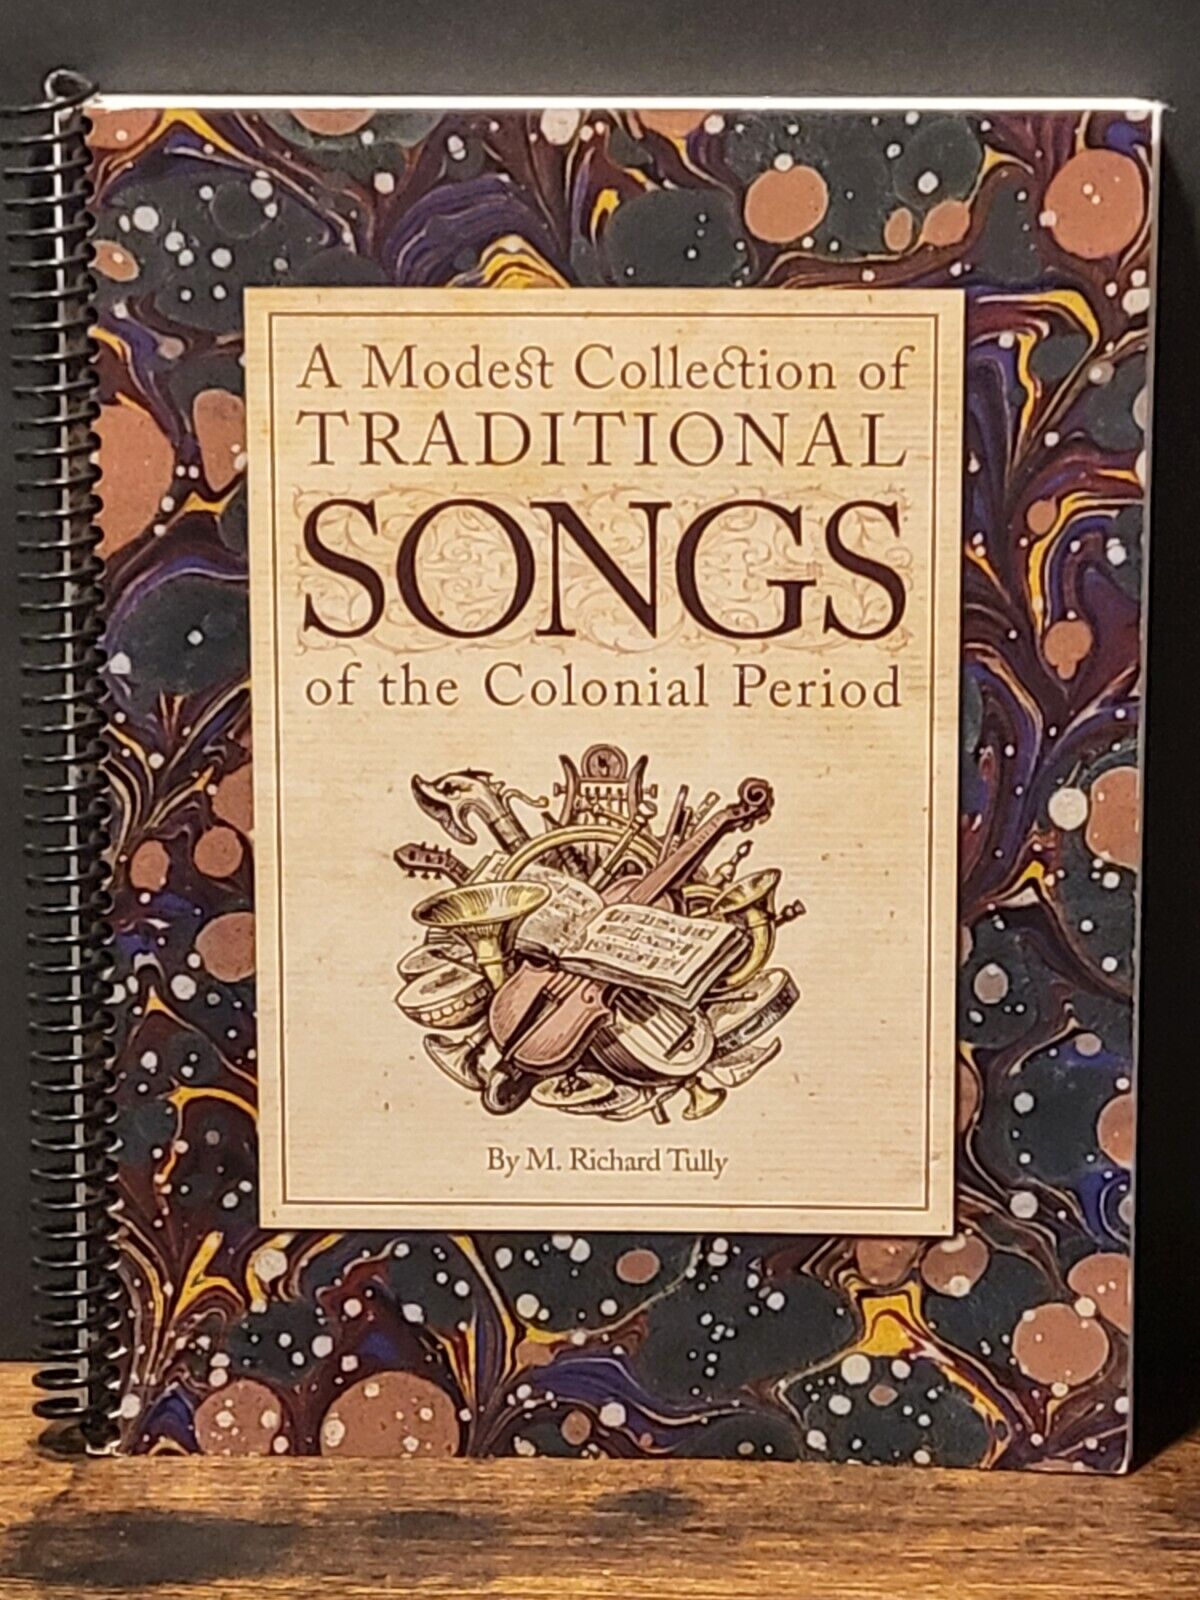 MODEST COLLECTION OF TRADITIONAL SONGS COLONIAL PERIOD~M. Richard Tully